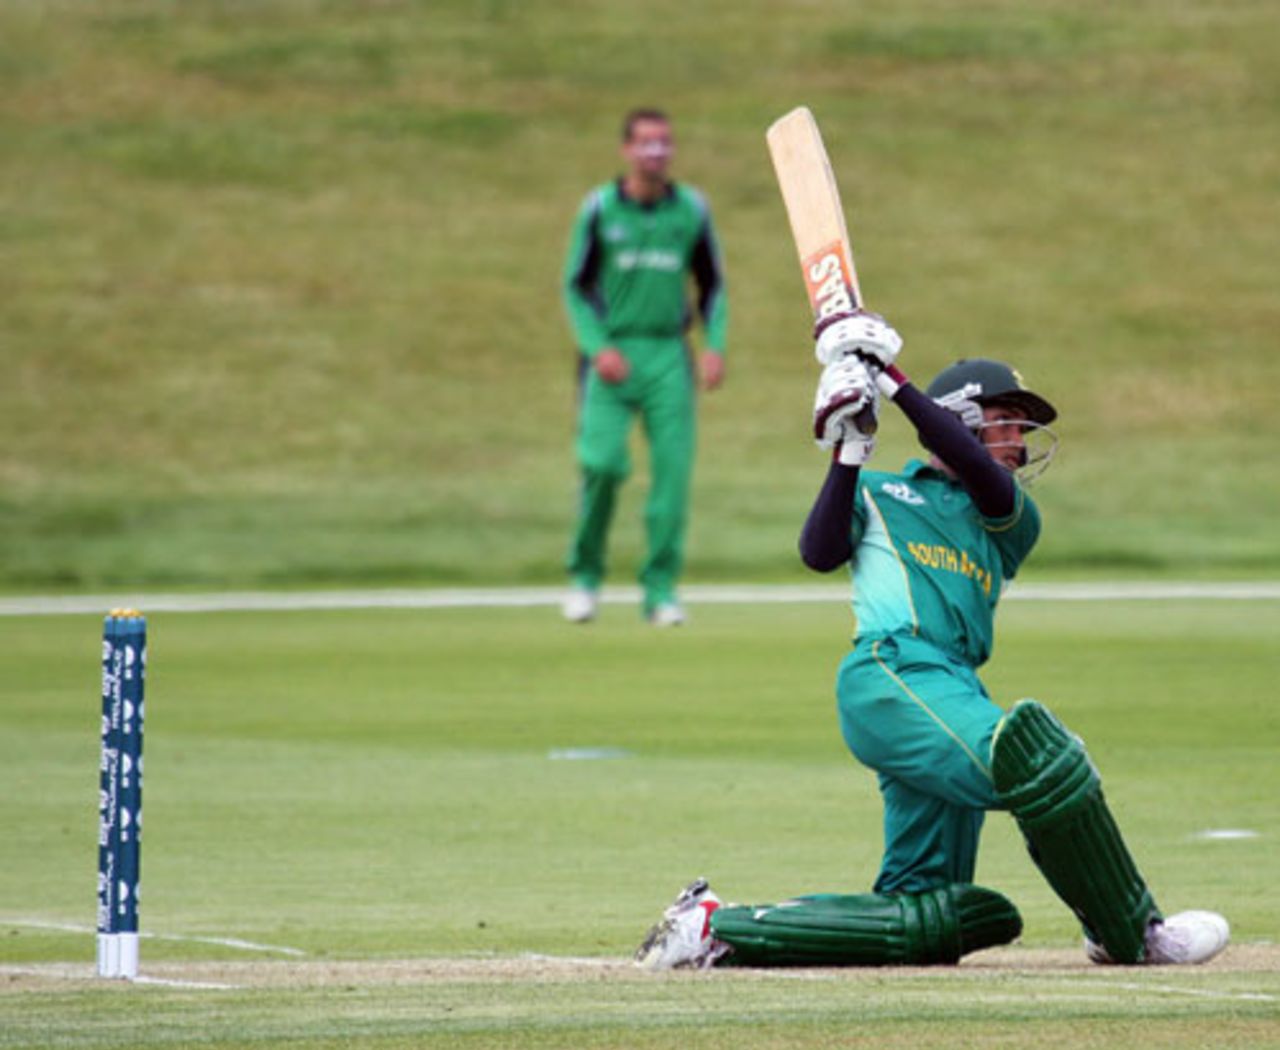 Dominic Hendricks hits out during his 47, Ireland Under-19s v South Africa Under-19s, 3rd Match, Group B, ICC Under-19 World Cup, Queenstown, January 15, 2010
